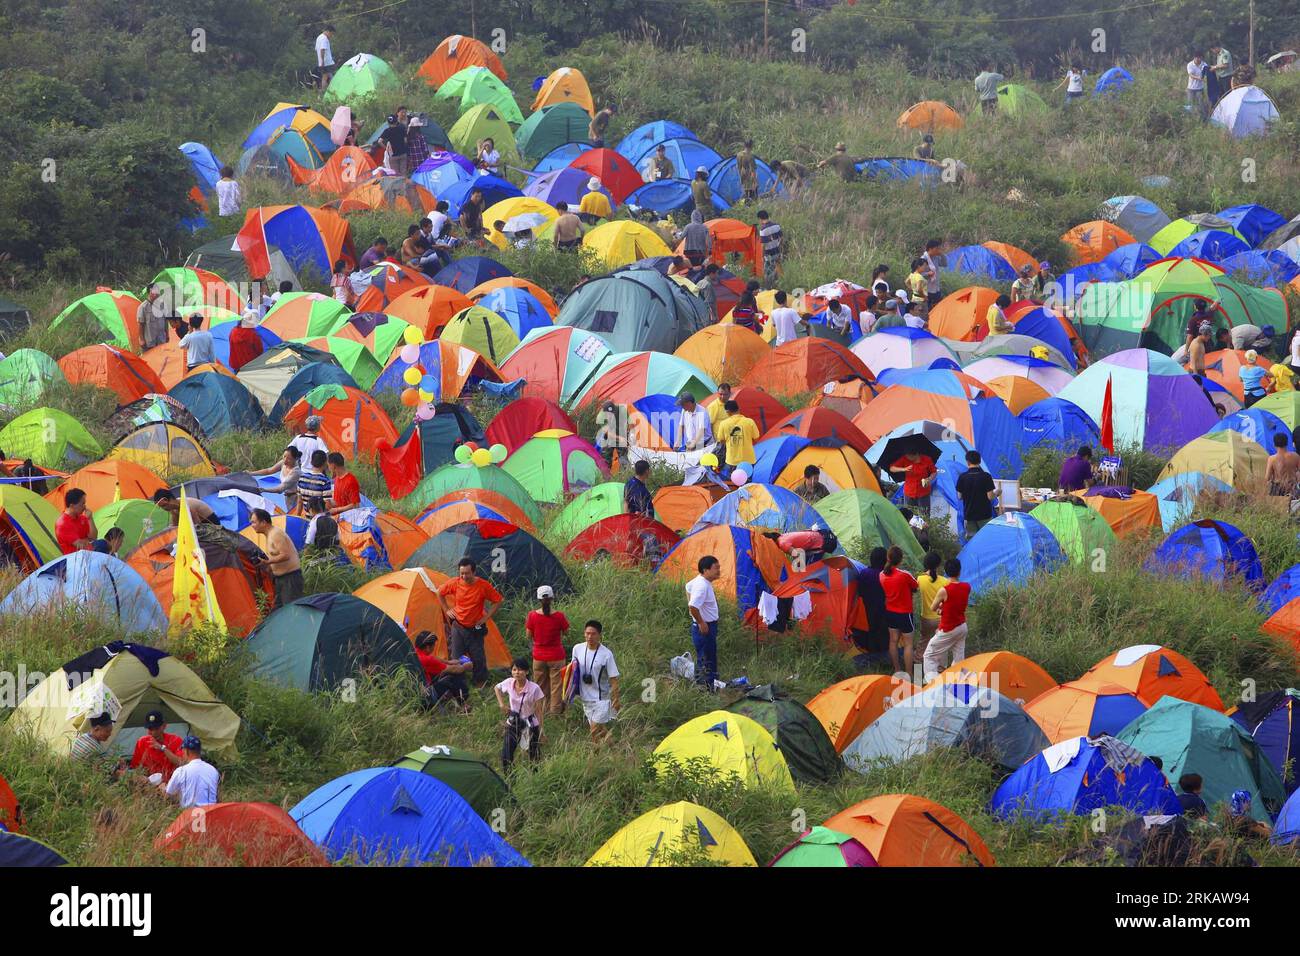 Bildnummer: 54431958  Datum: 11.09.2010  Copyright: imago/Xinhua PINGXIANG, Sept. 12, 2010 (Xinhua) -- Thousands of backpackers camp in the Wugong Mountain in Pingxiang, east China s Jiangxi Province, Sept. 11, 2010. About 3,600 backpackers gathered in the Wugong Mountain to show their capacities of surviving in the wild during a three-day-long tent festival which kicked off on Friday. (Xinhua/Yu Heping) (zn) CHINA-JIANGXI-PINGXIANG-TENT FESTIVAL (CN) PUBLICATIONxNOTxINxCHN Gesellschaft kbdig xkg 2010 quer Aufmacher o0 zelten Survival Totale    Bildnummer 54431958 Date 11 09 2010 Copyright Ima Stock Photo